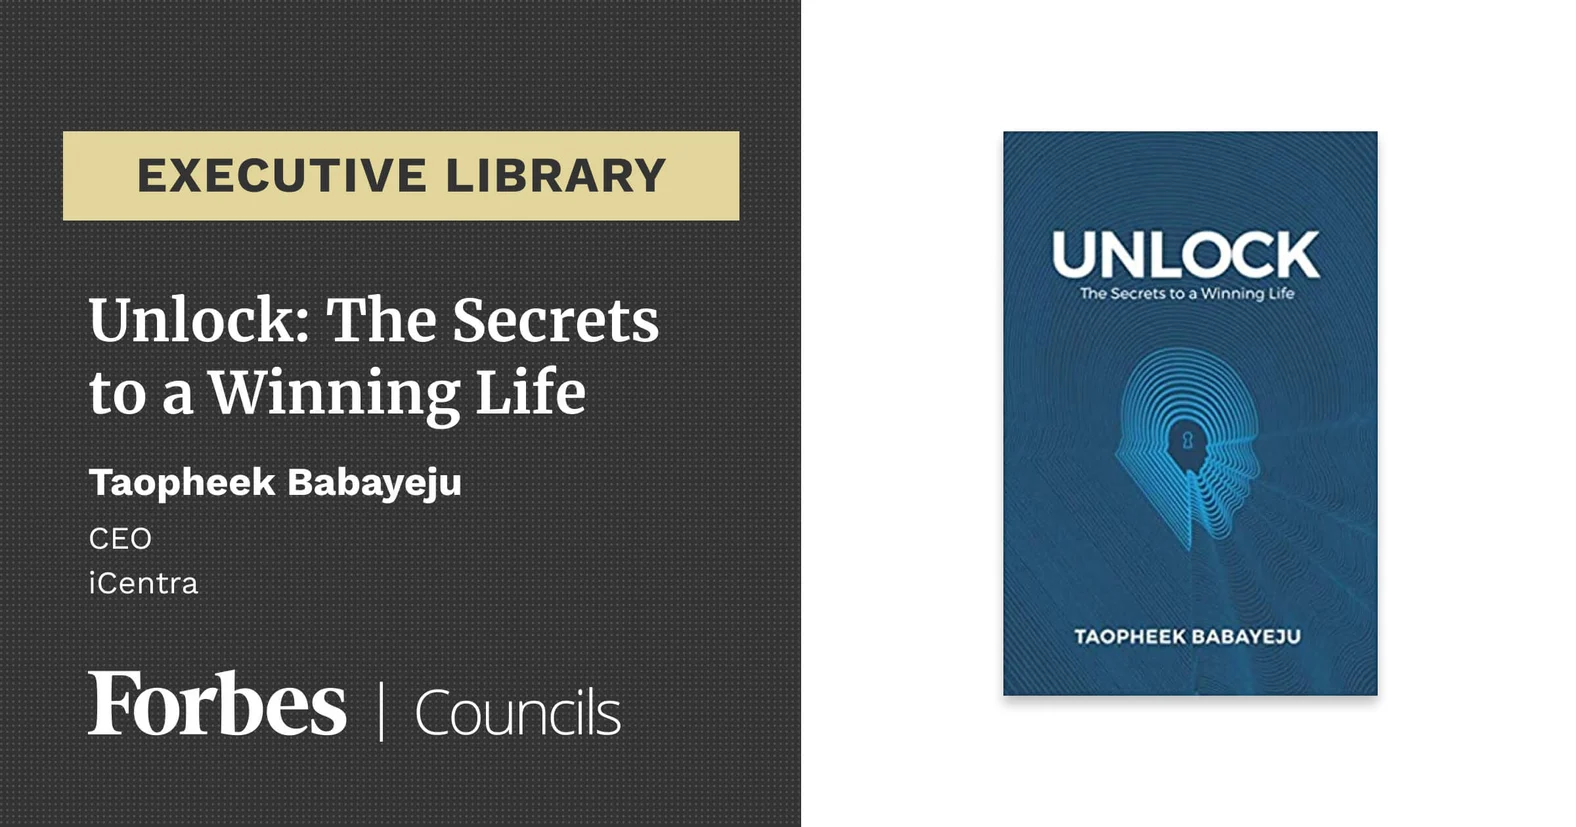 Taopheek Babayeju’s Unlock book listed in Forbes executive library